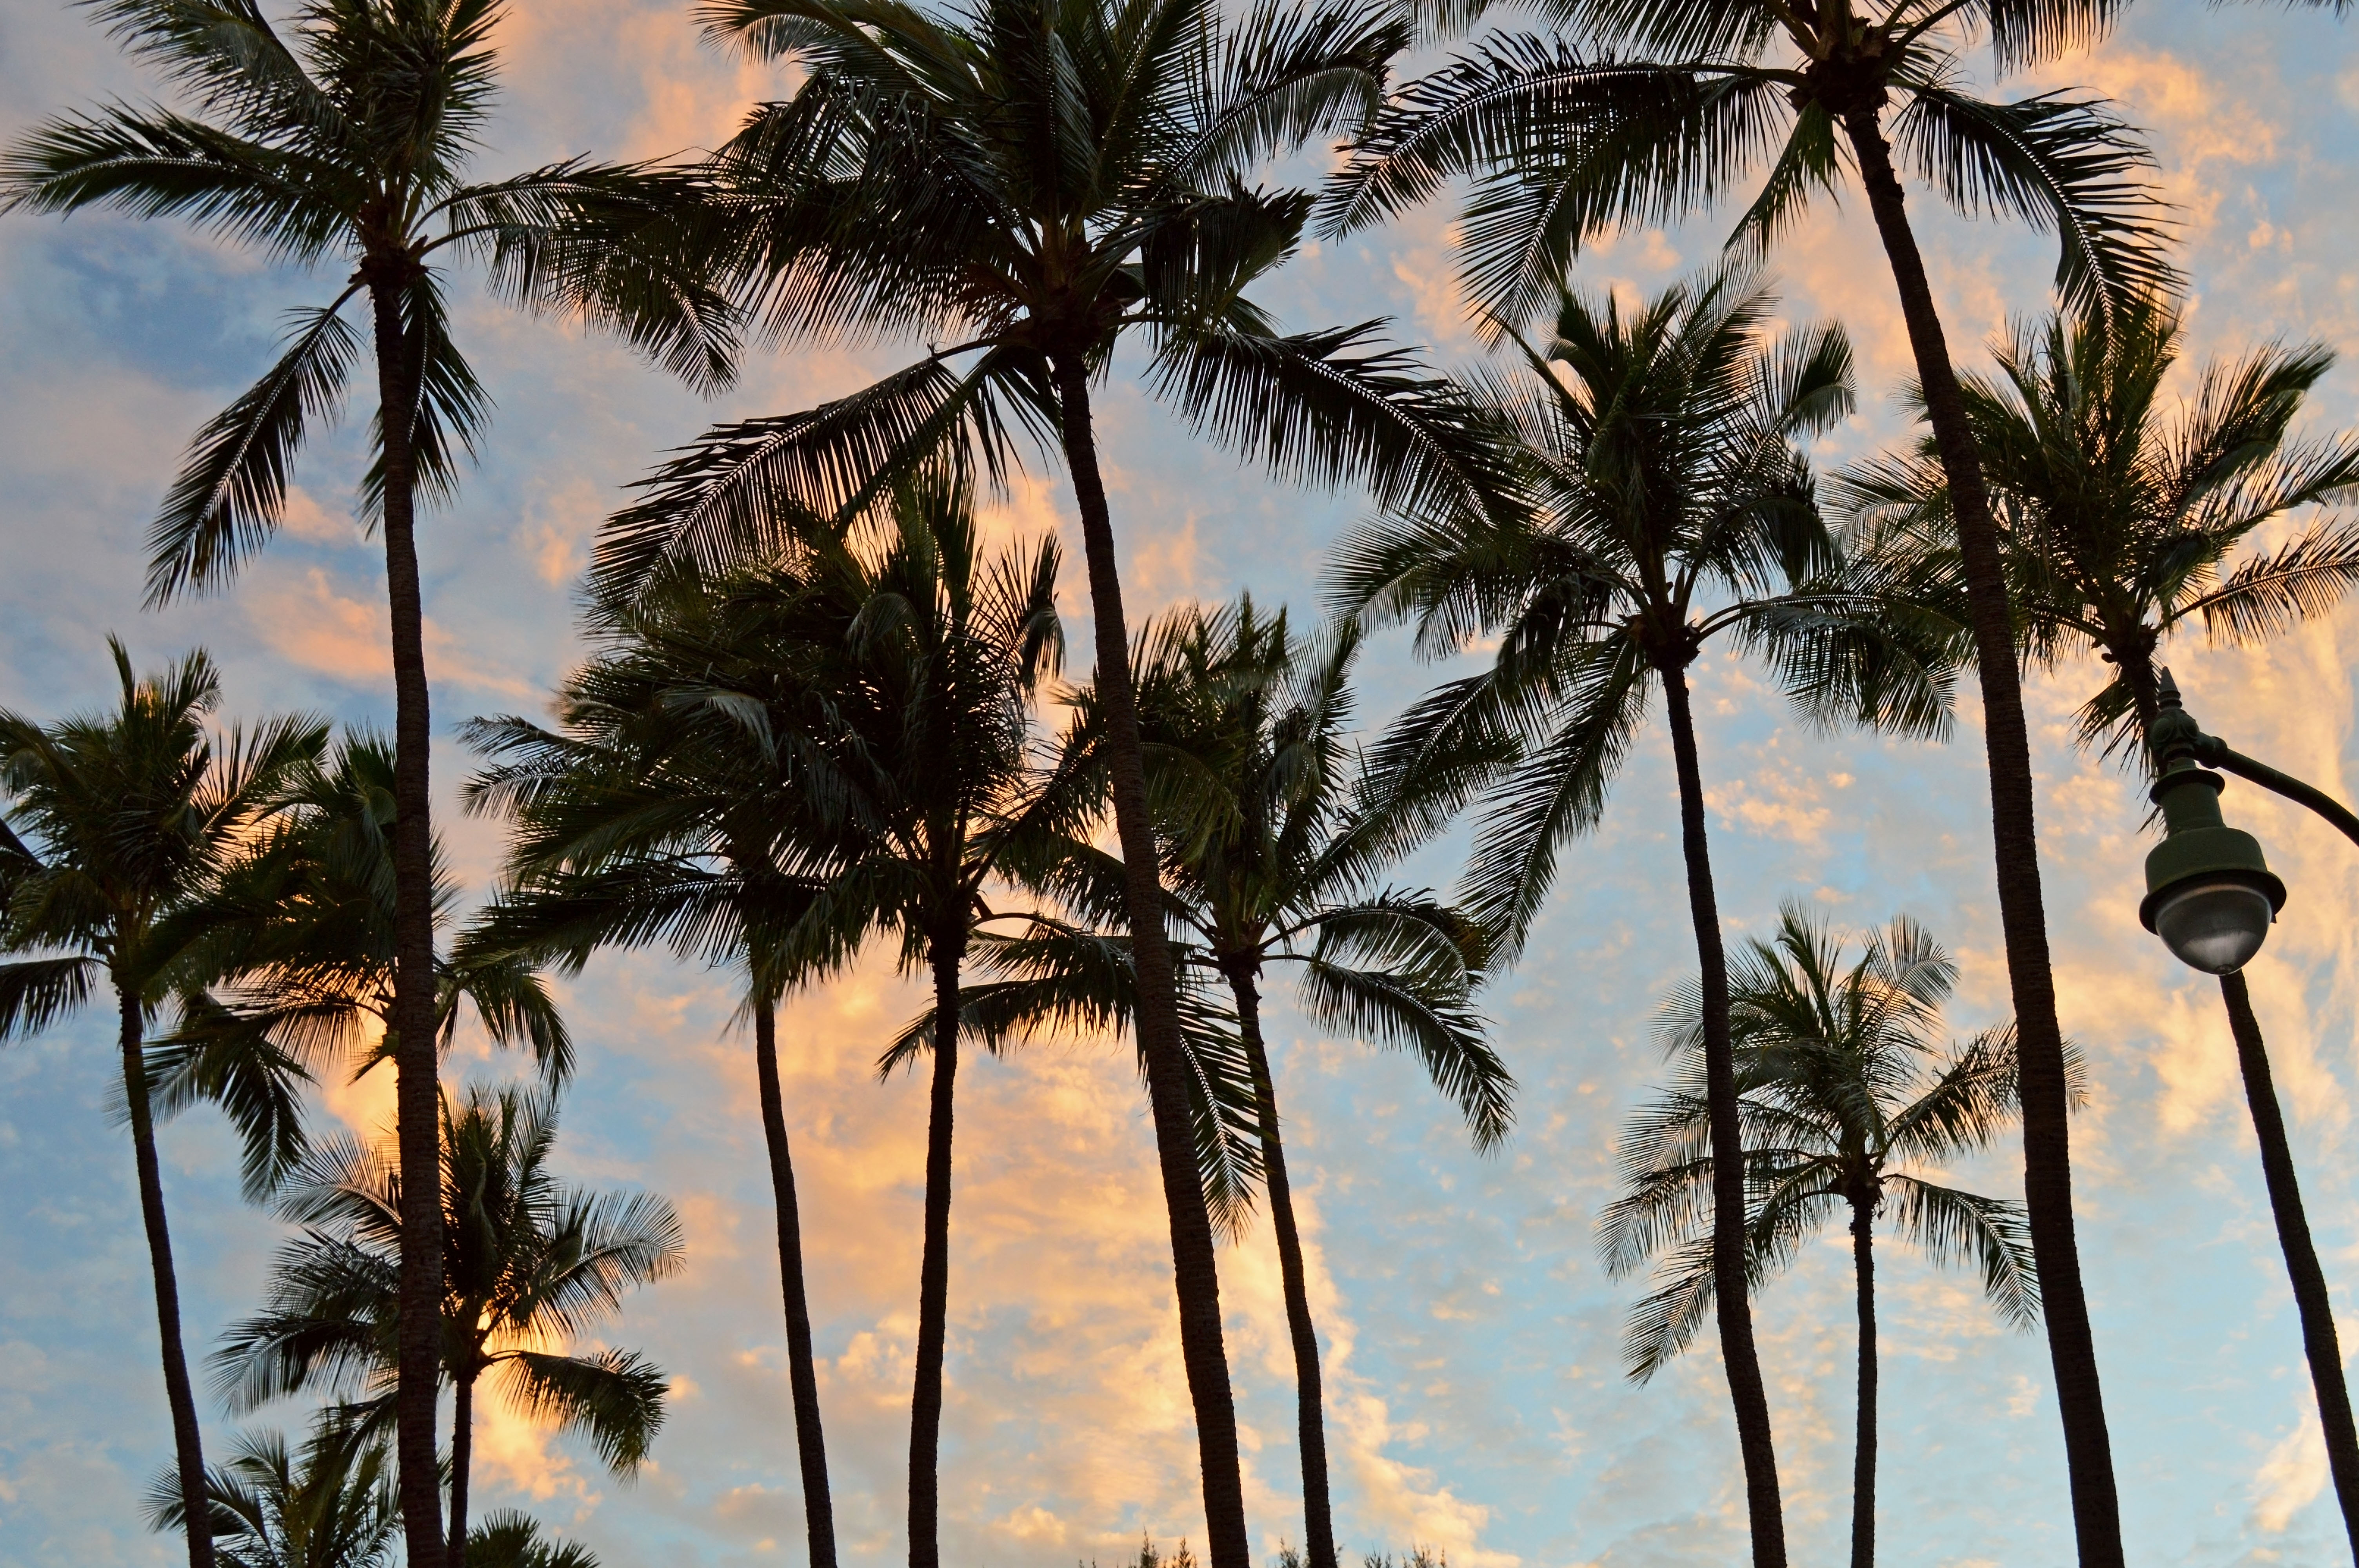 A photo of palm trees in front of a cloudy sky. - Hawaii